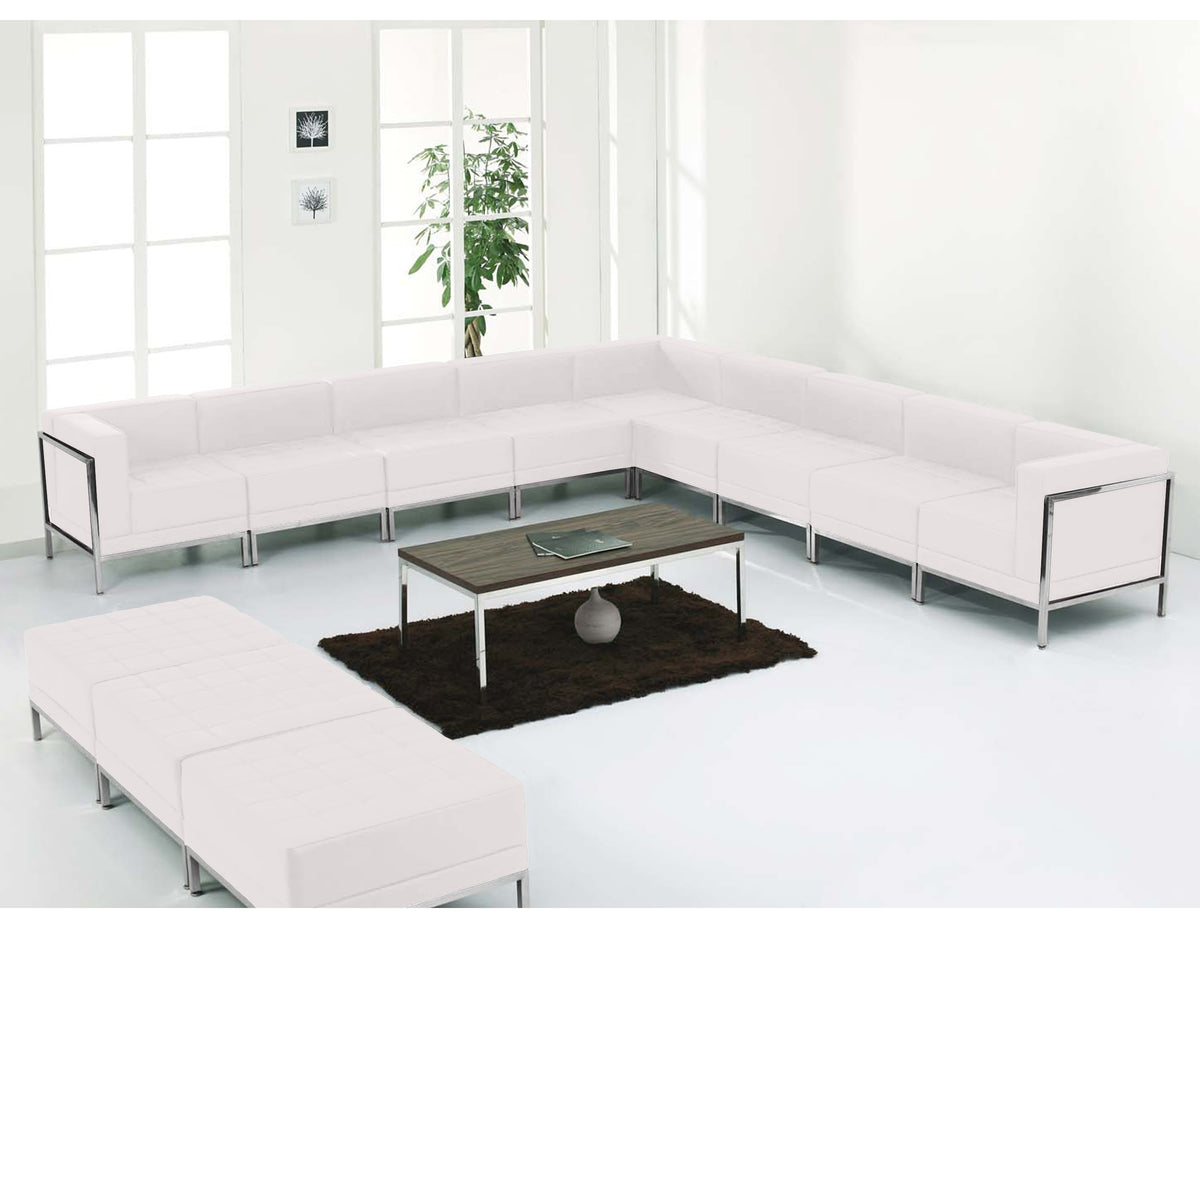 Melrose White |#| 12 PC White LeatherSoft Modular Sectional & Ottoman Set - Stainless Steel Legs